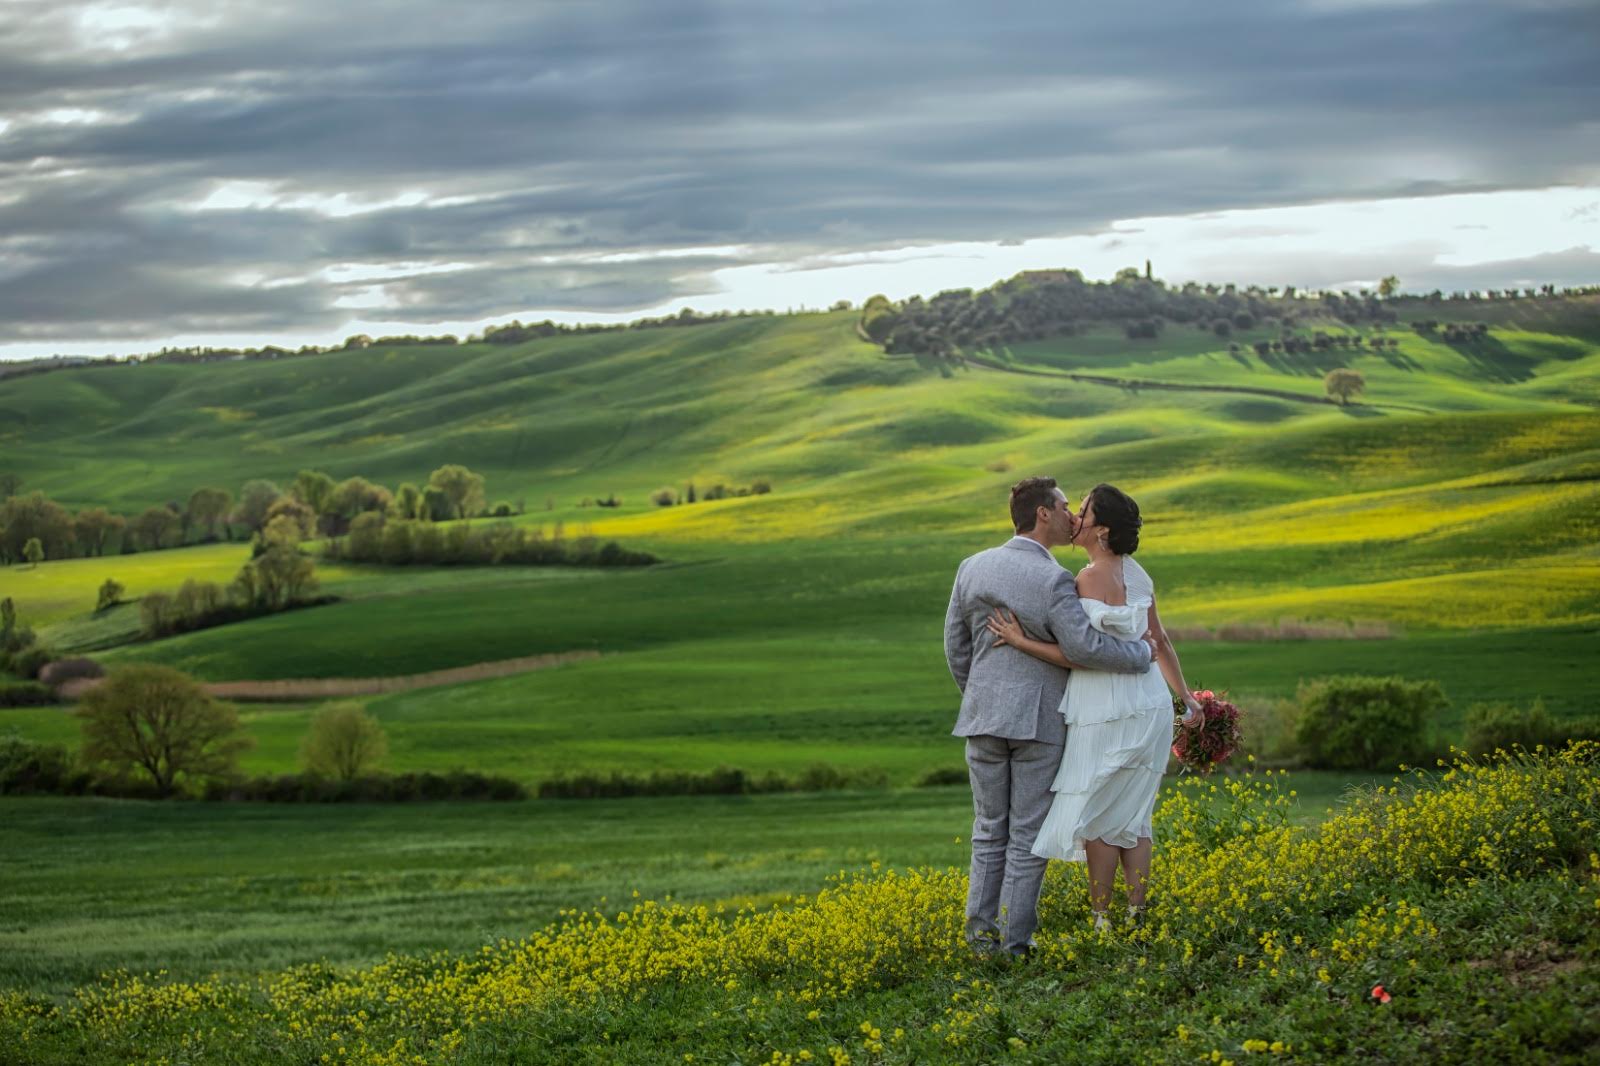 Colleen & Riley - Elopement in Val d’Orcia 28th April 2019